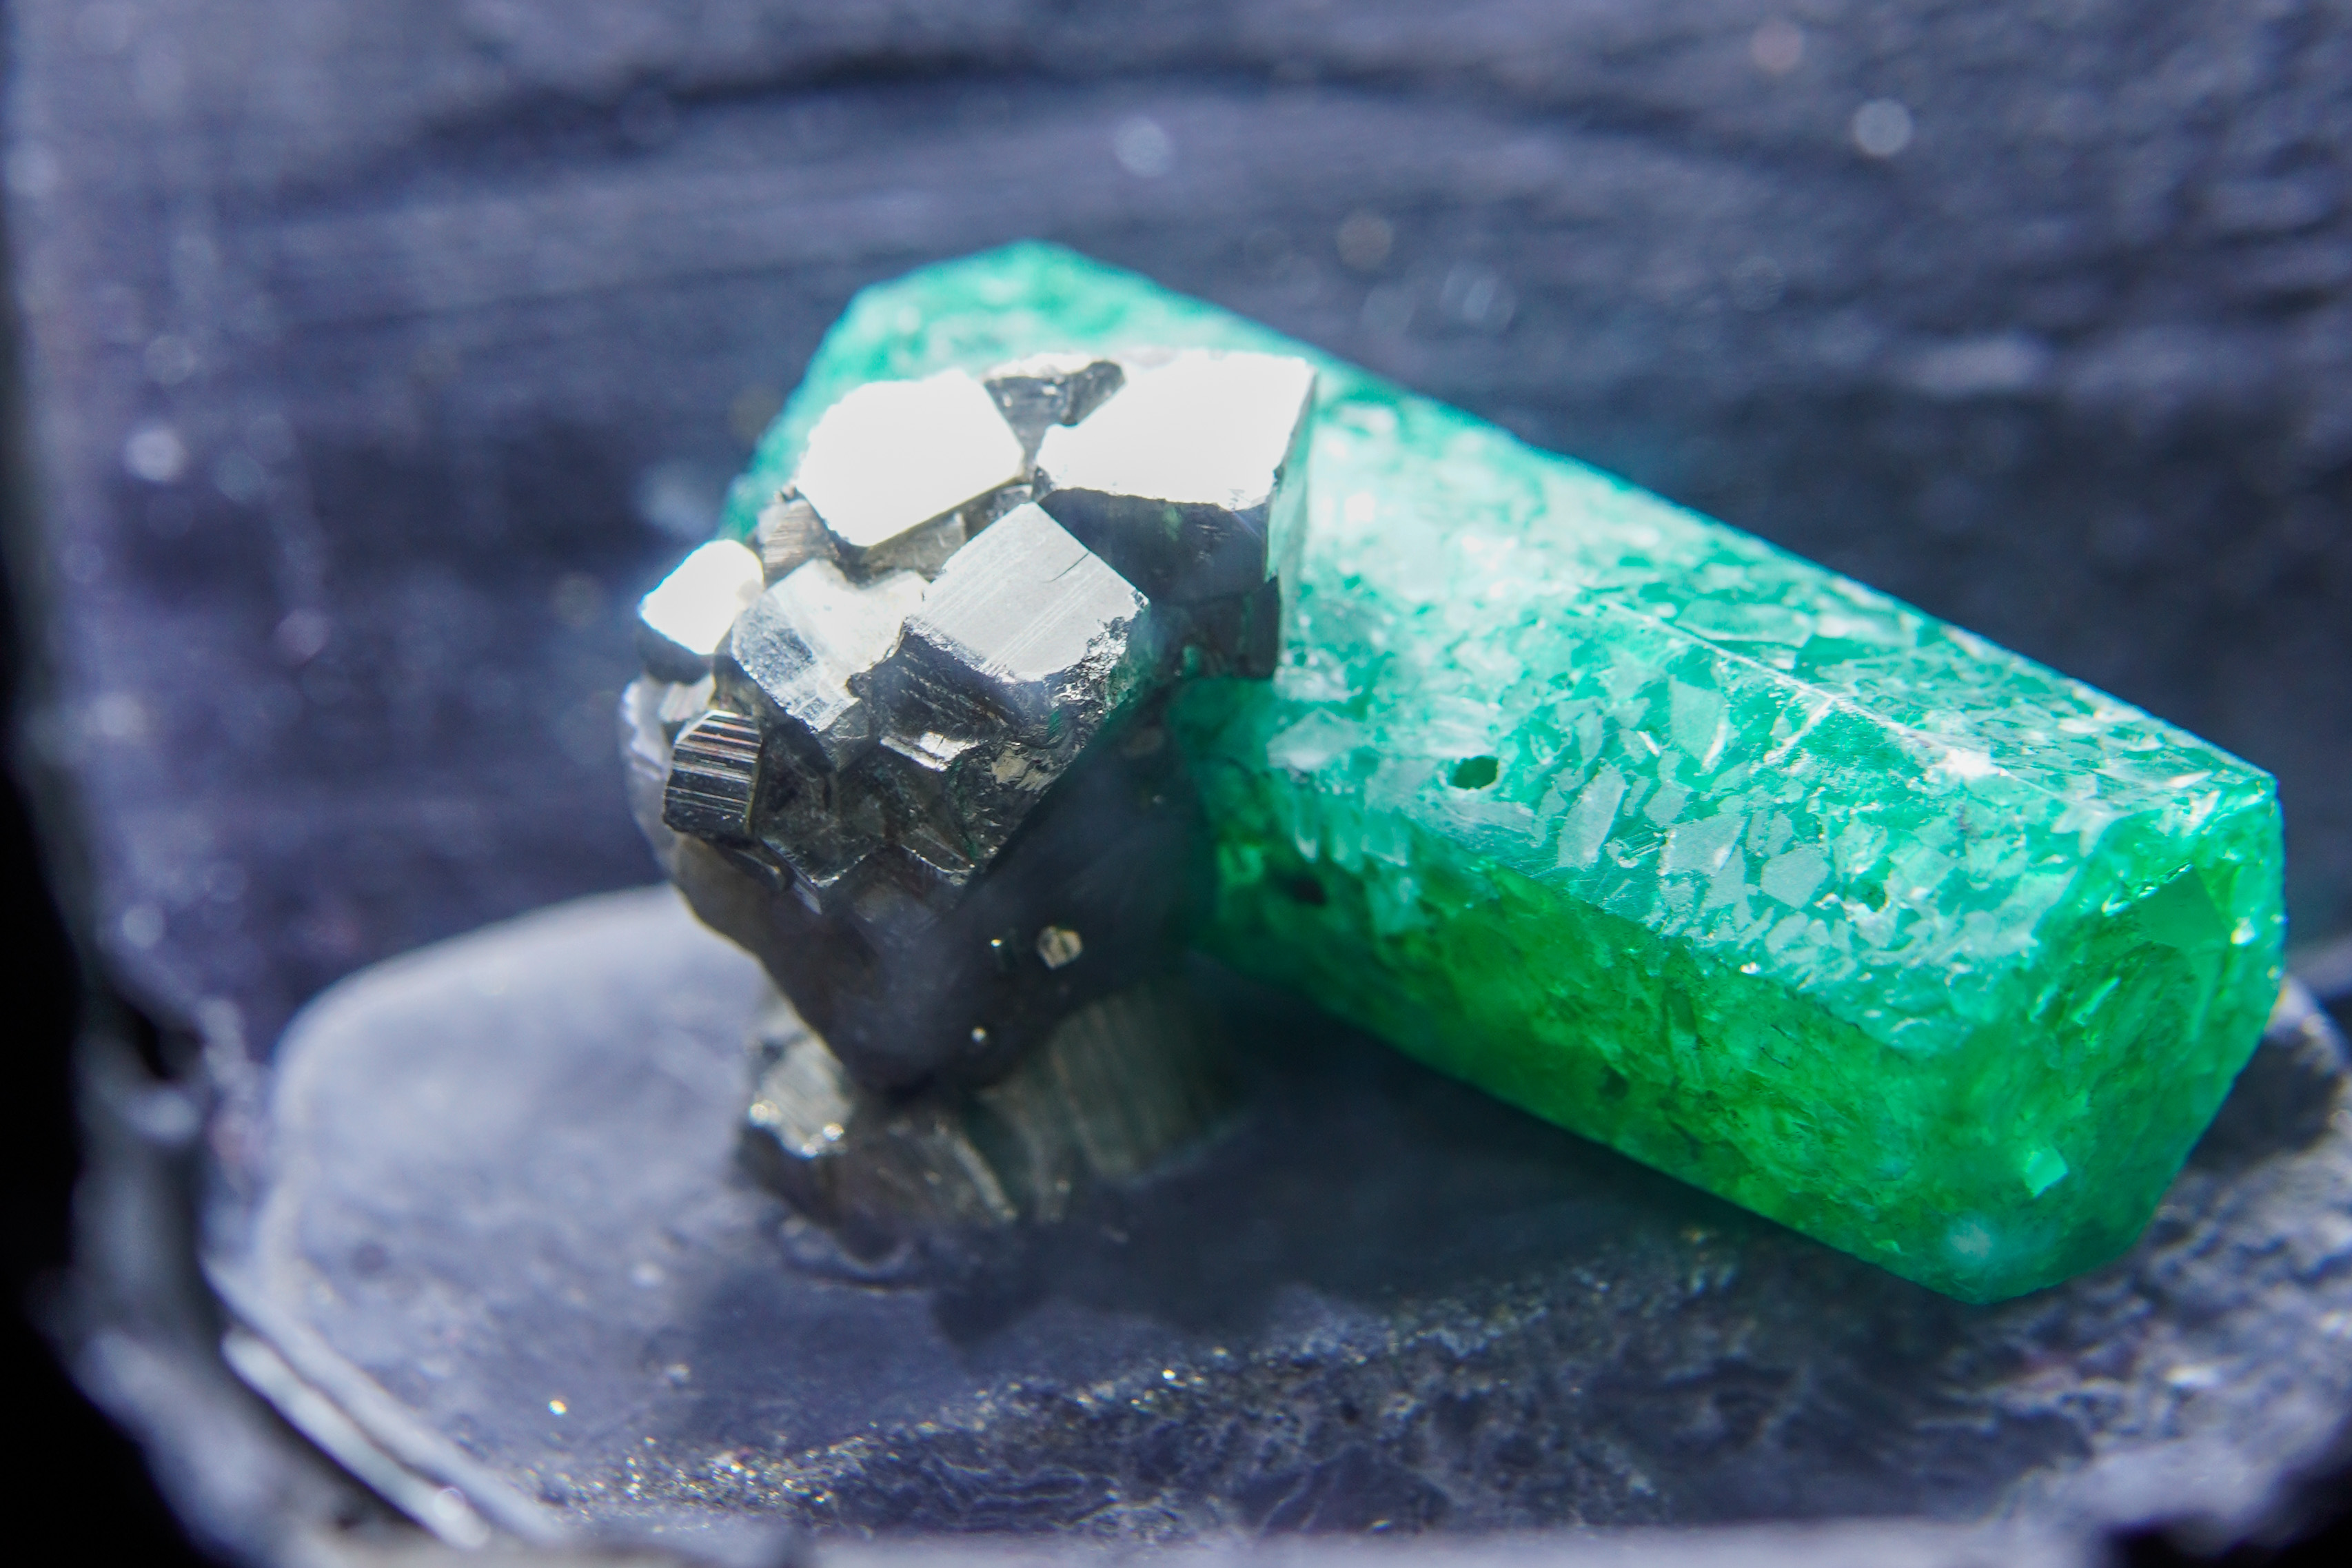 You can purchase high quality emeralds as a gift for someone special or a souvenir from Colombia that you can enjoy. 